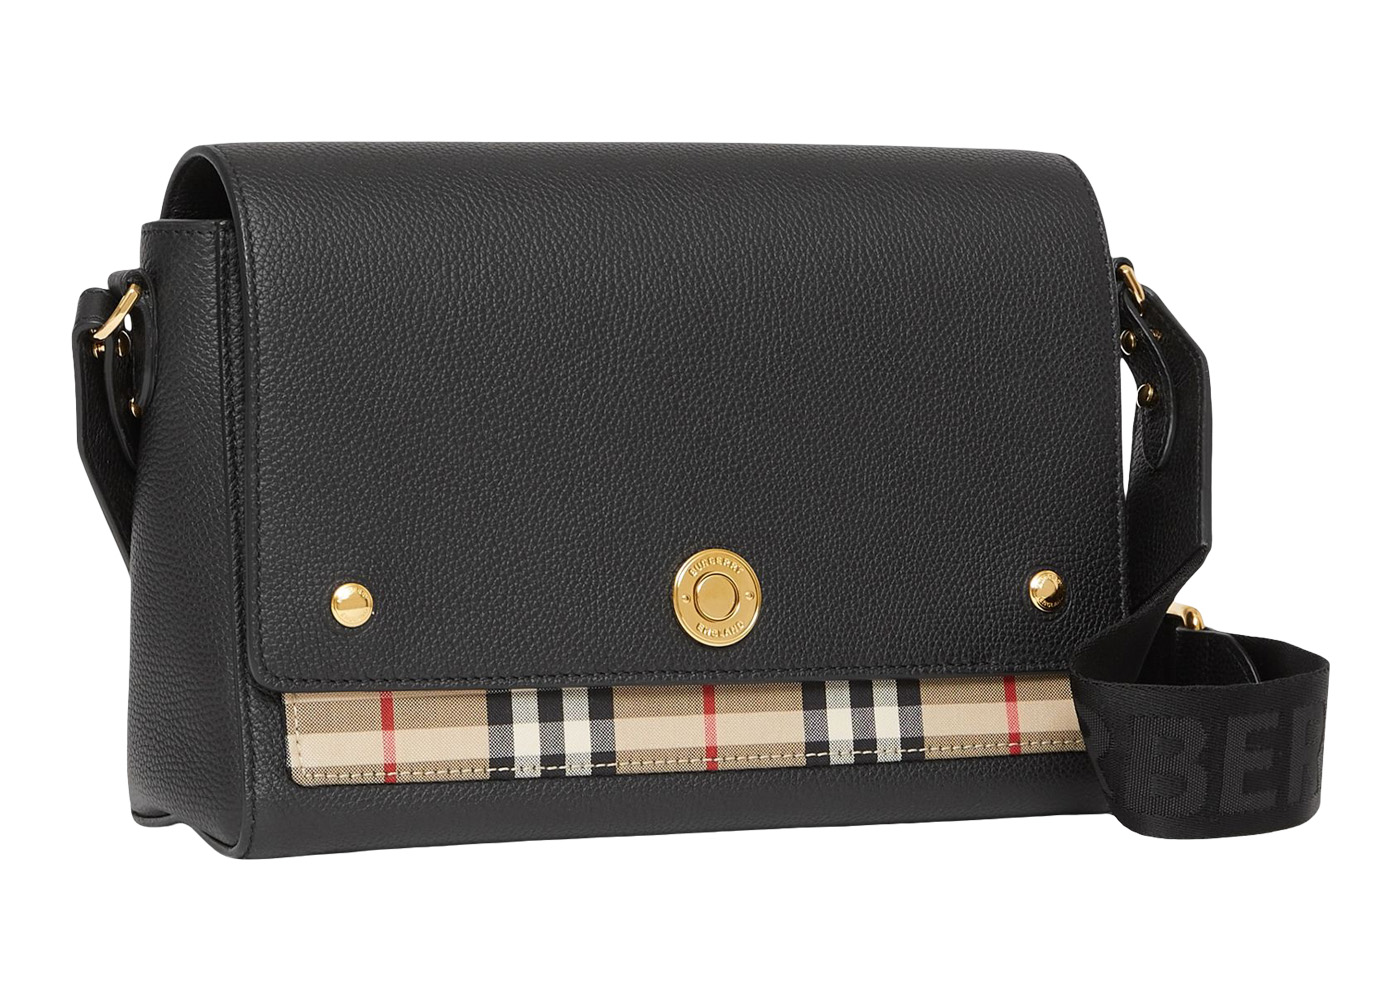 Burberry Vintage Check and Leather Crossbody Bag Archive Beige